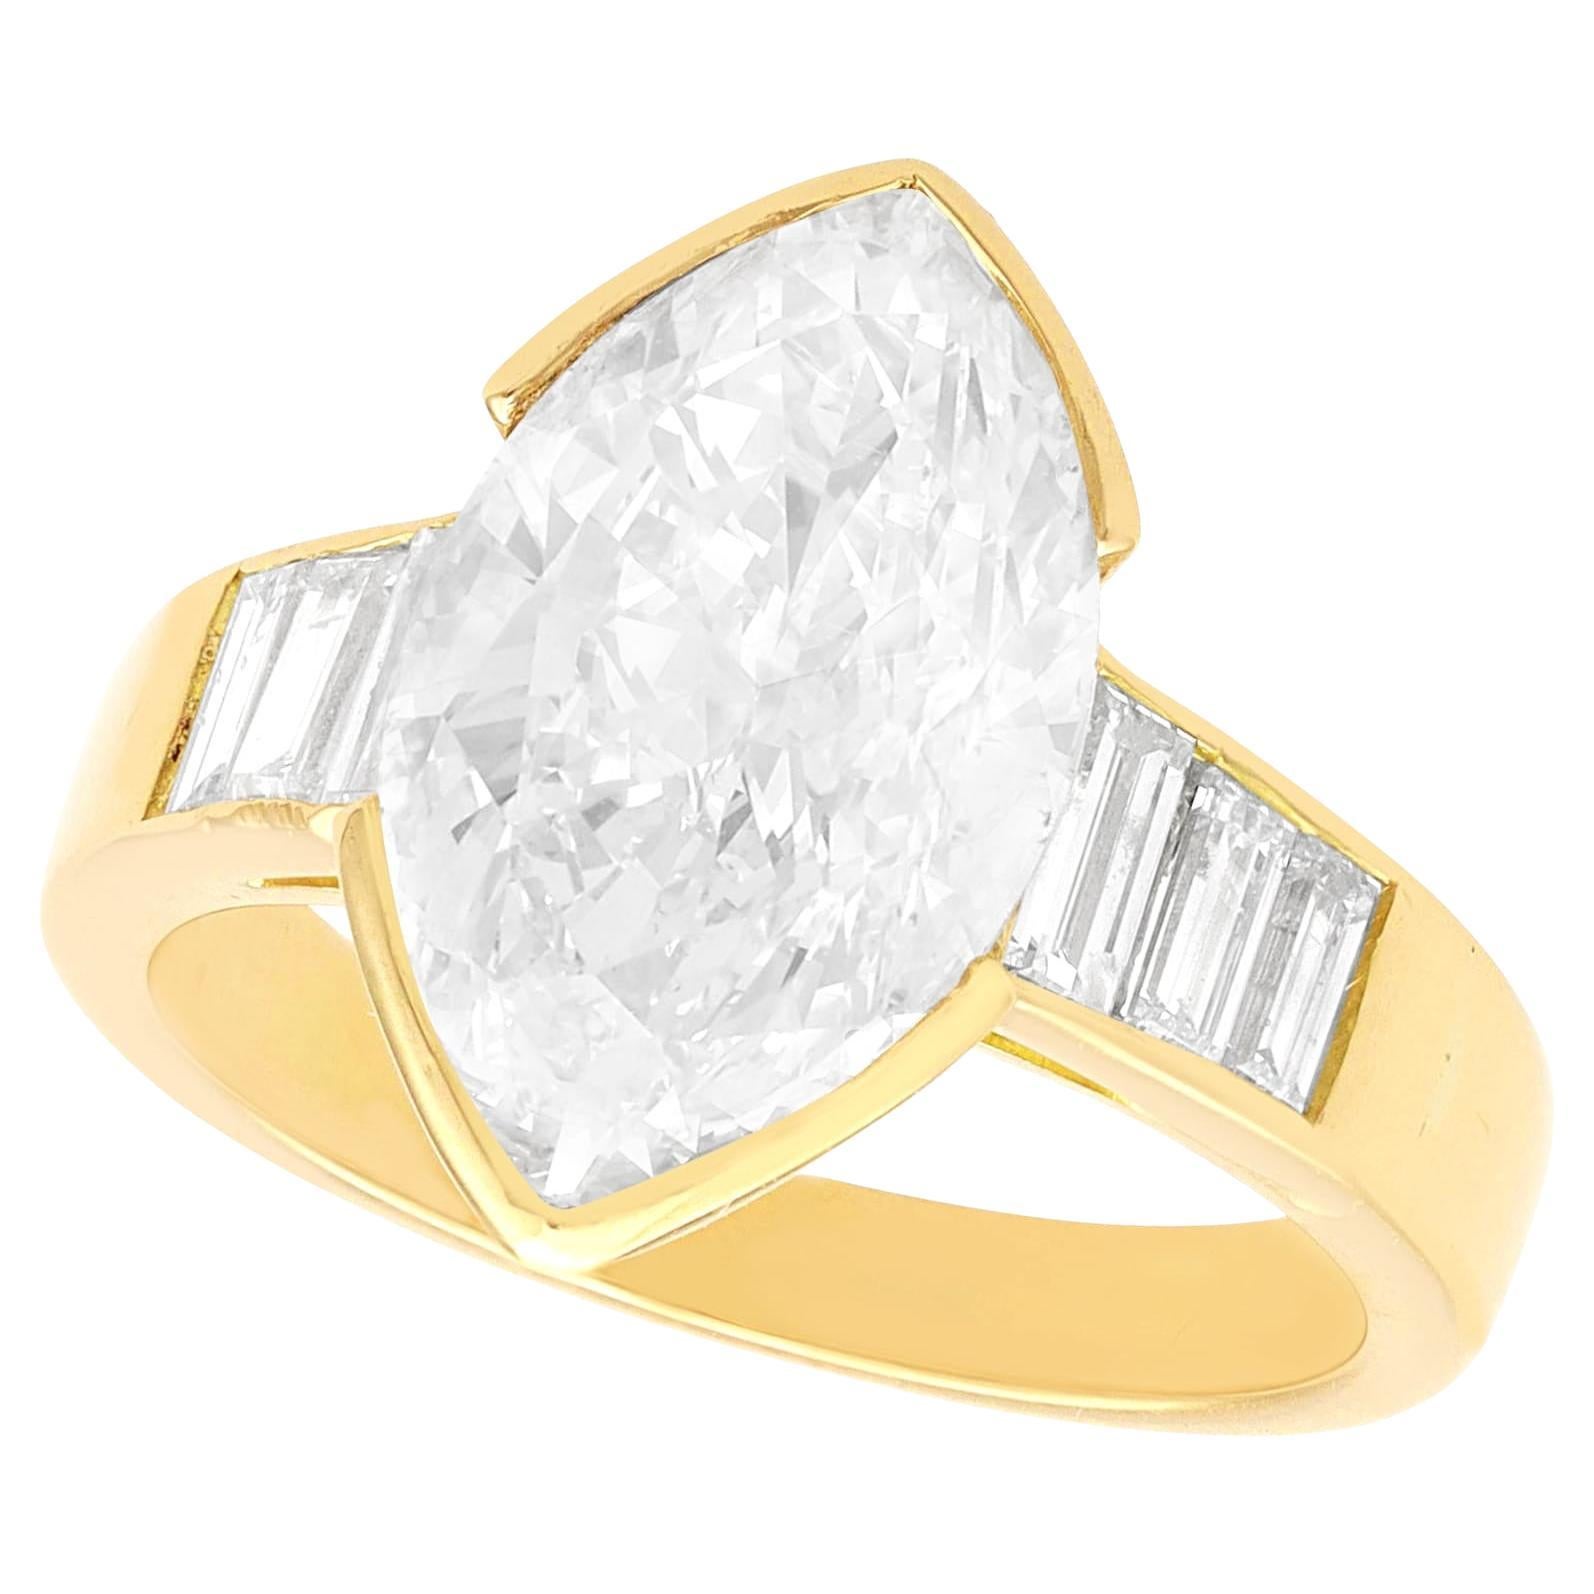 Vintage 3.93 Carat Diamond and Yellow Gold Solitaire Engagement Ring